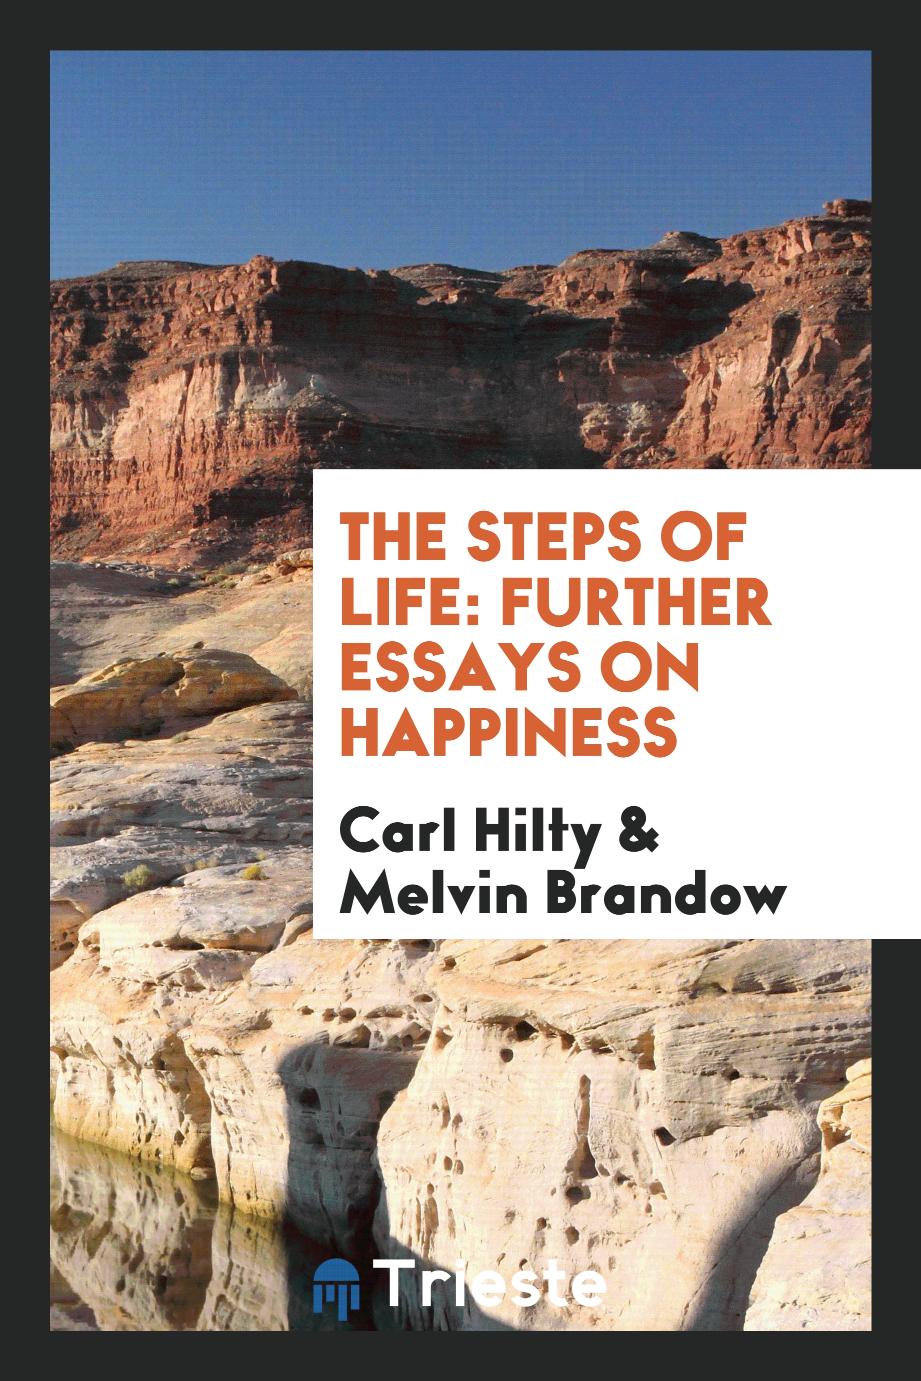 The steps of life: further essays on happiness